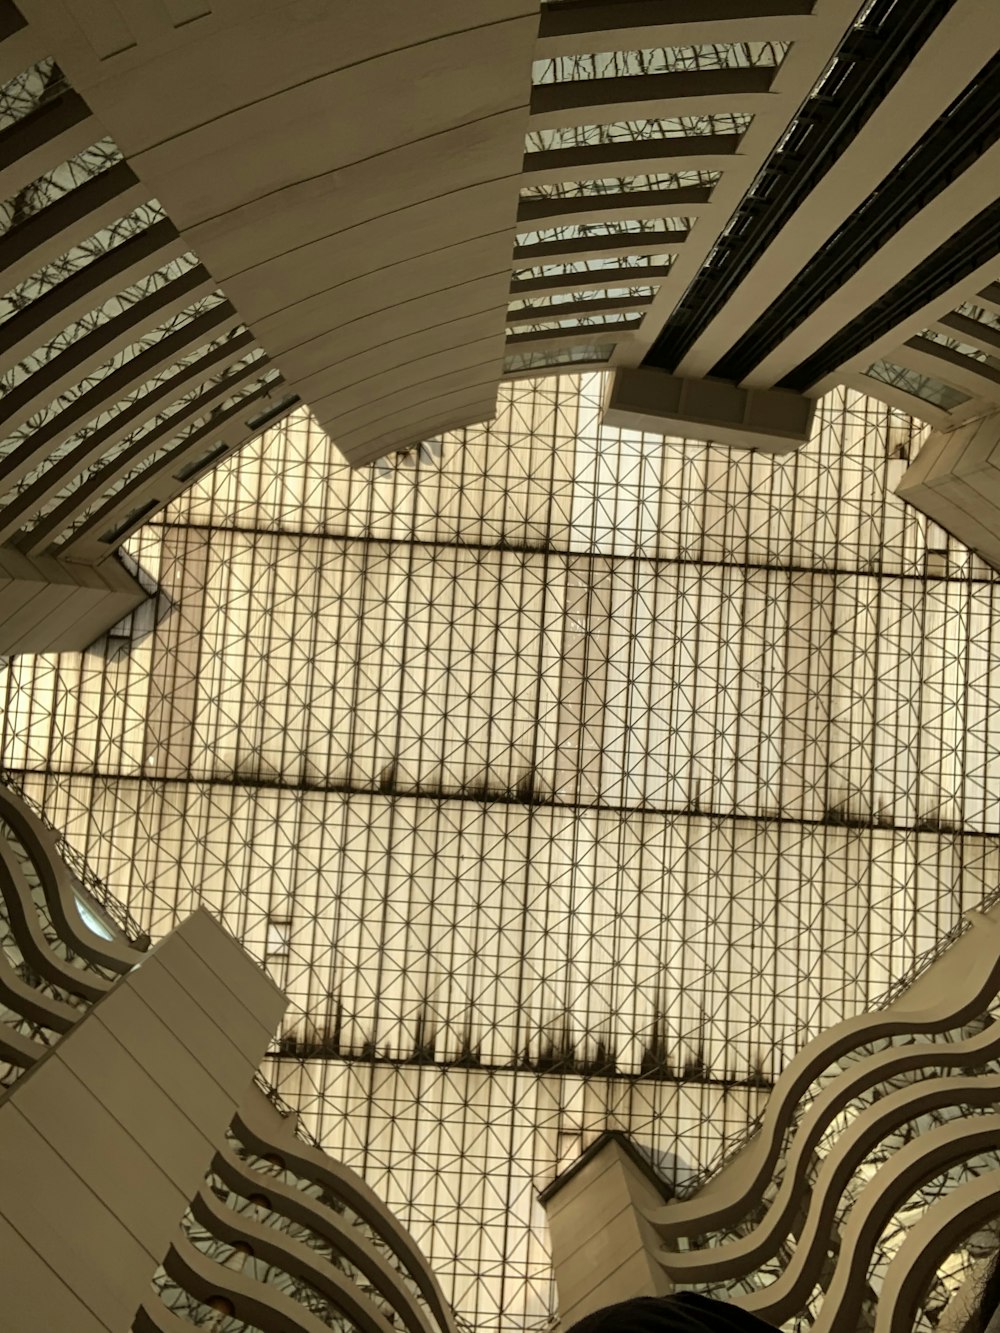 the ceiling of a building with many windows